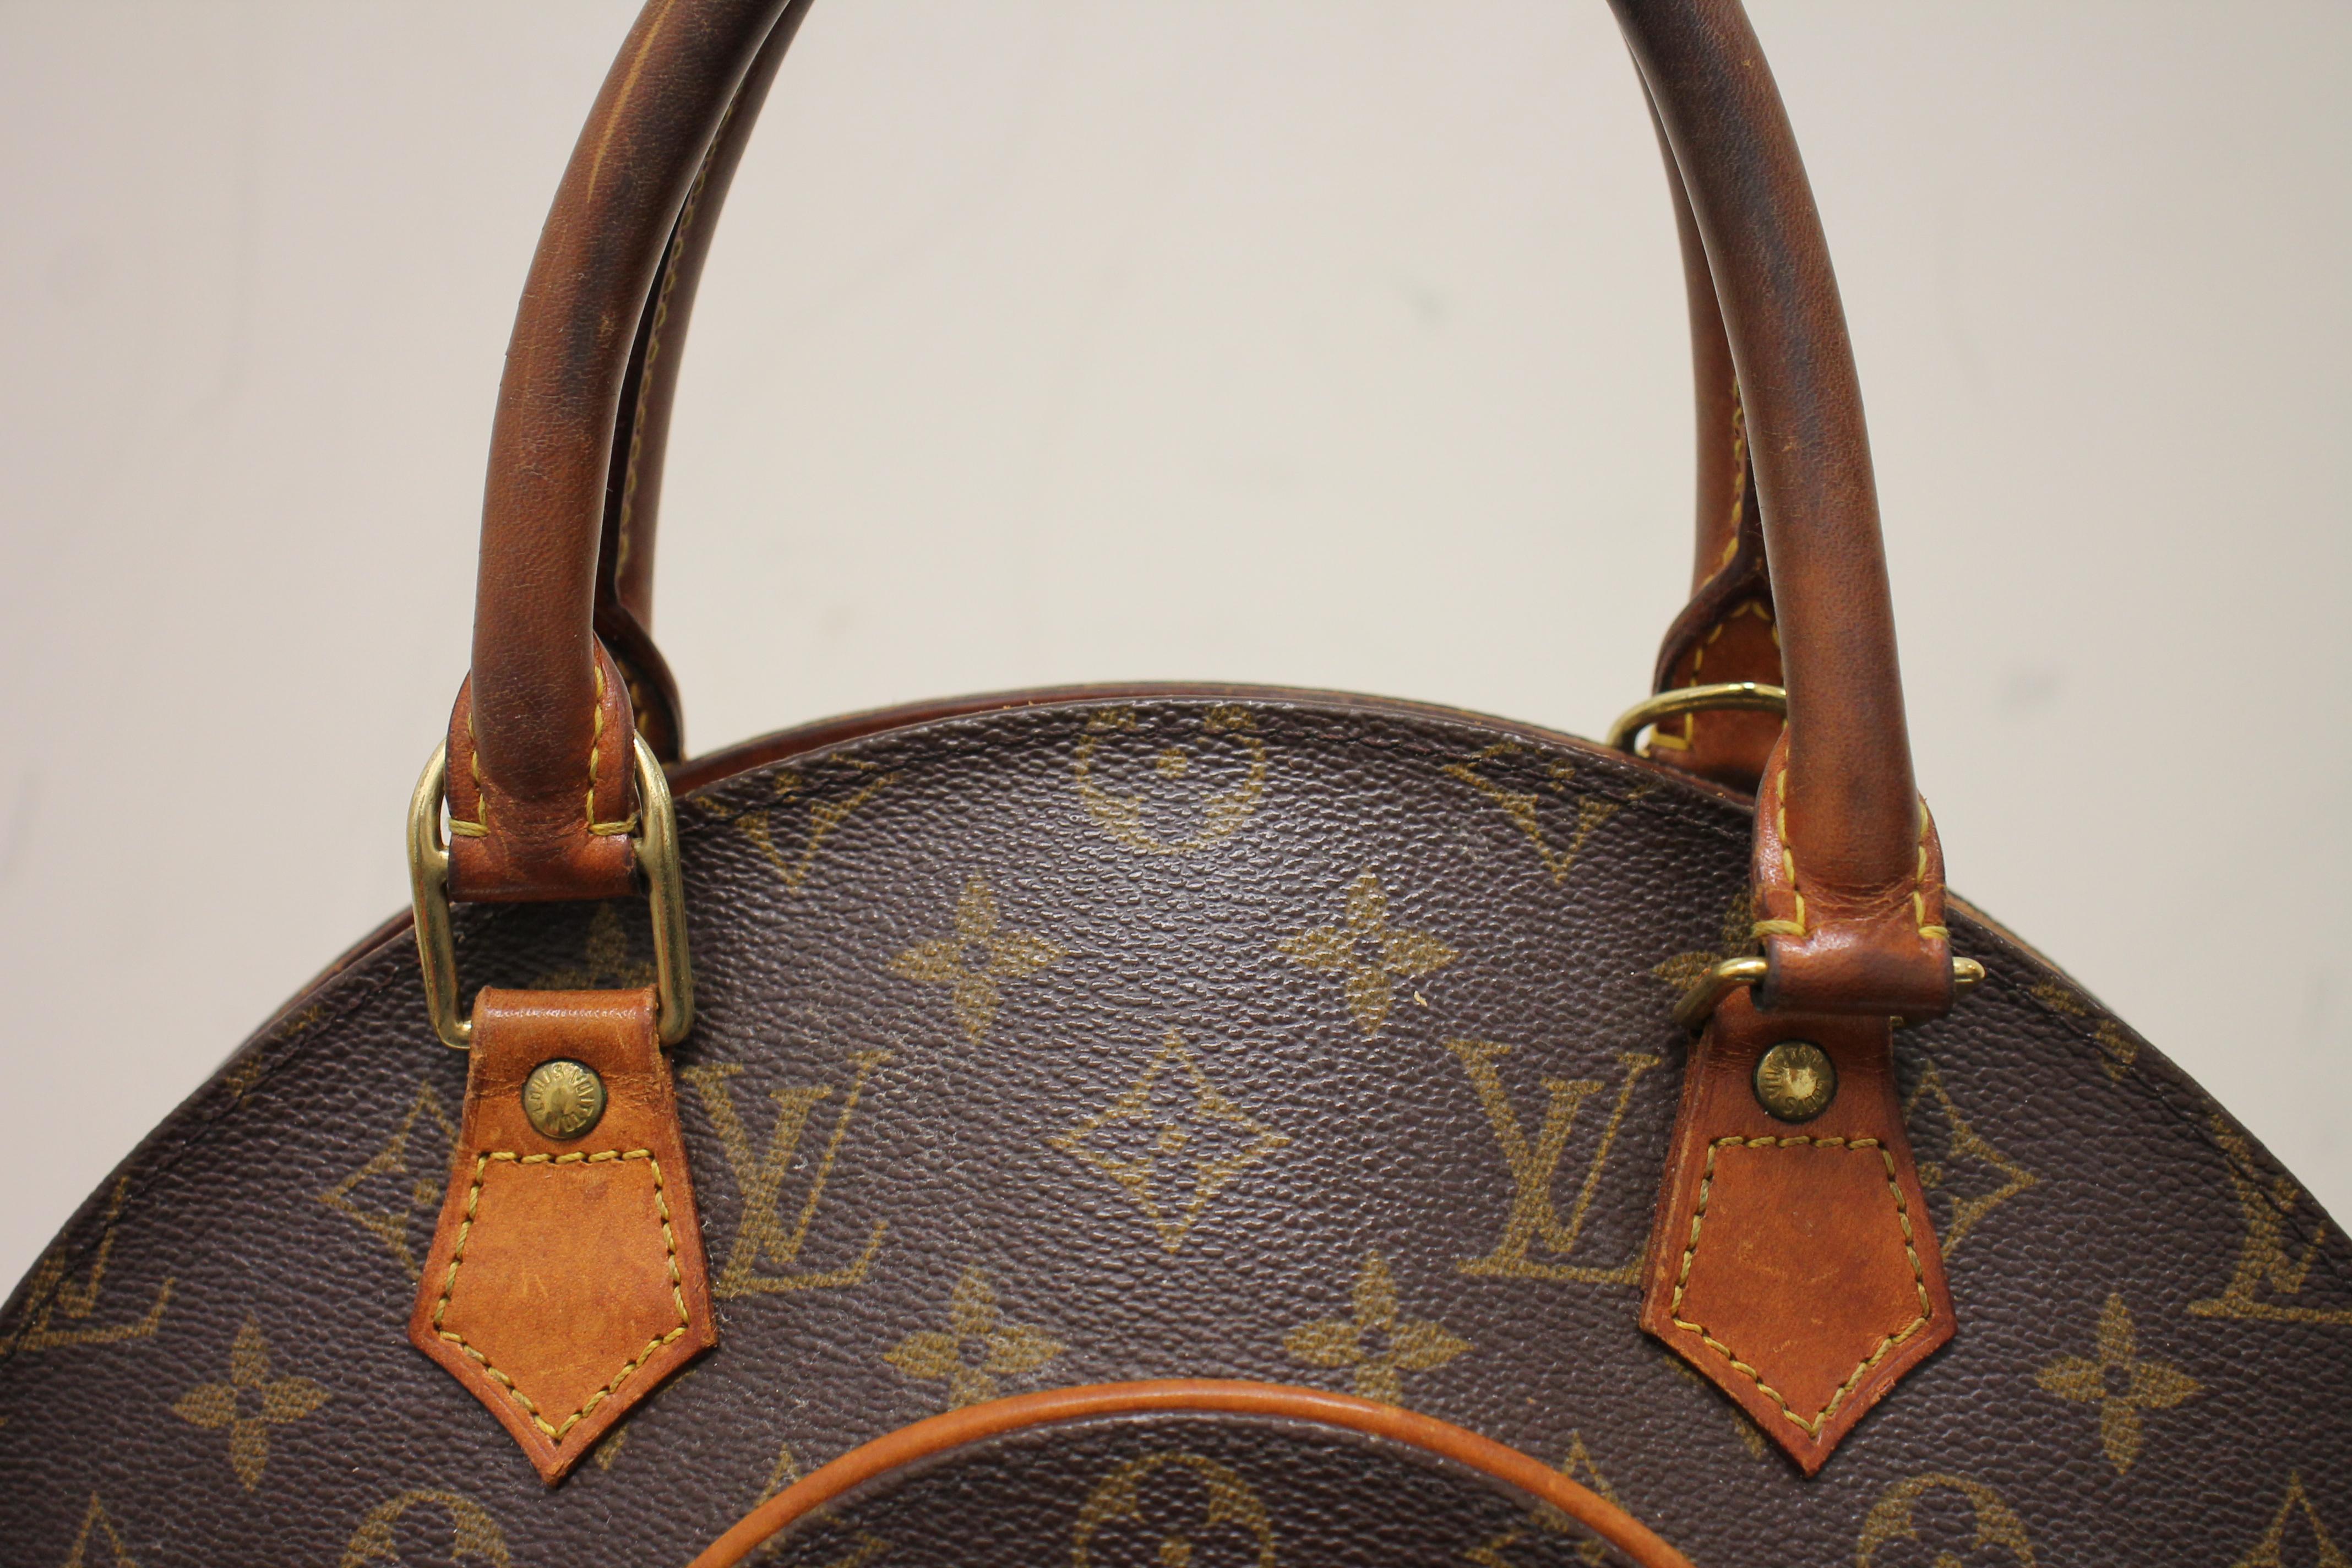 Louis Vuitton Monogram Ellipse PM In Good Condition For Sale In Roslyn, NY